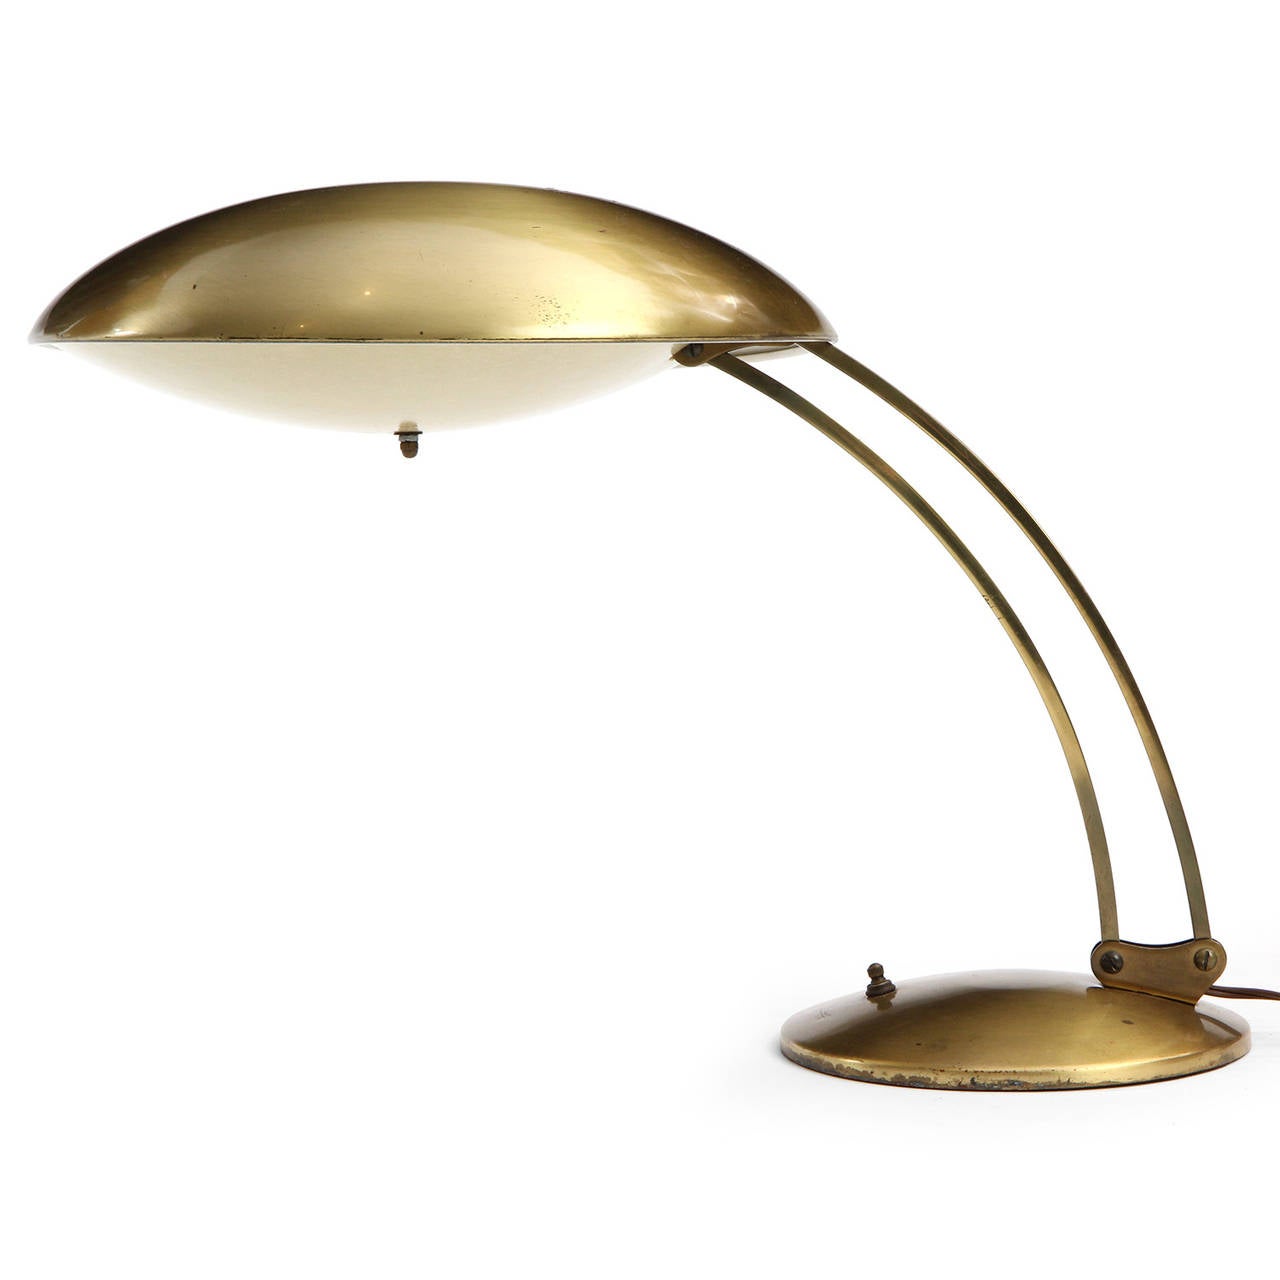 A sculptural and finely crafted adjustable lacquered brass table lamp having  a domed shade with a fiberglass diffuser supported by parallel arching and pivoting arms rising from a weighted disc base.